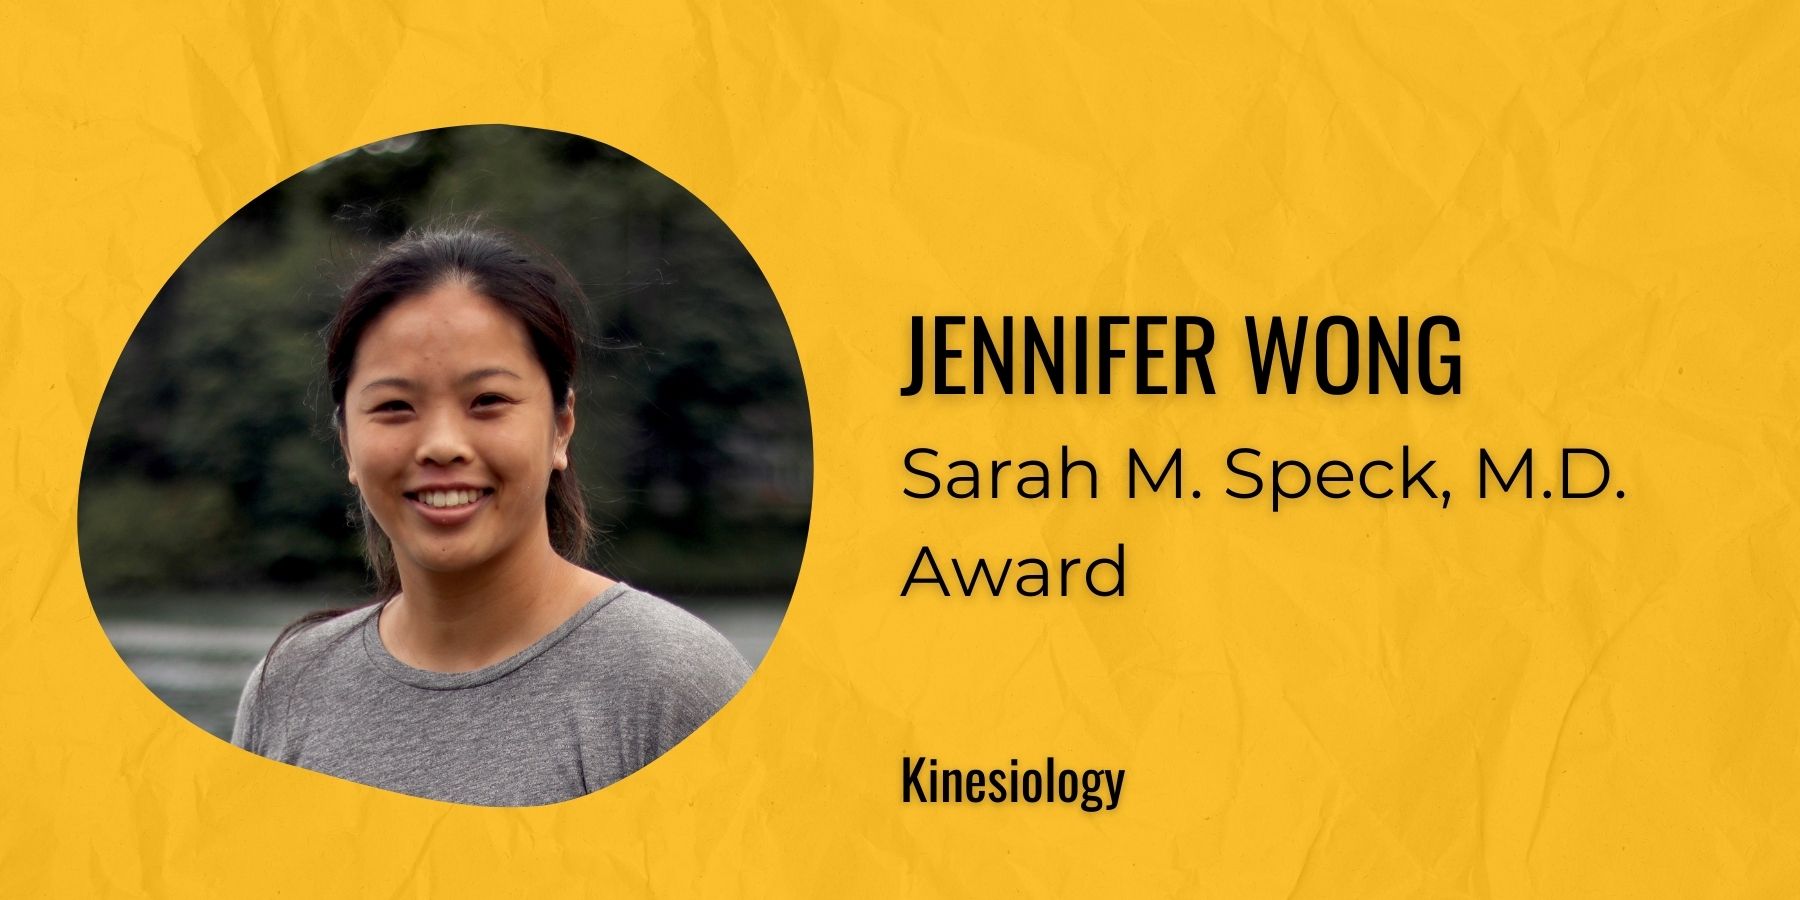 Image of Jennifer Wong with text: Sarah M. Speck, MD Award, Kinesiology
